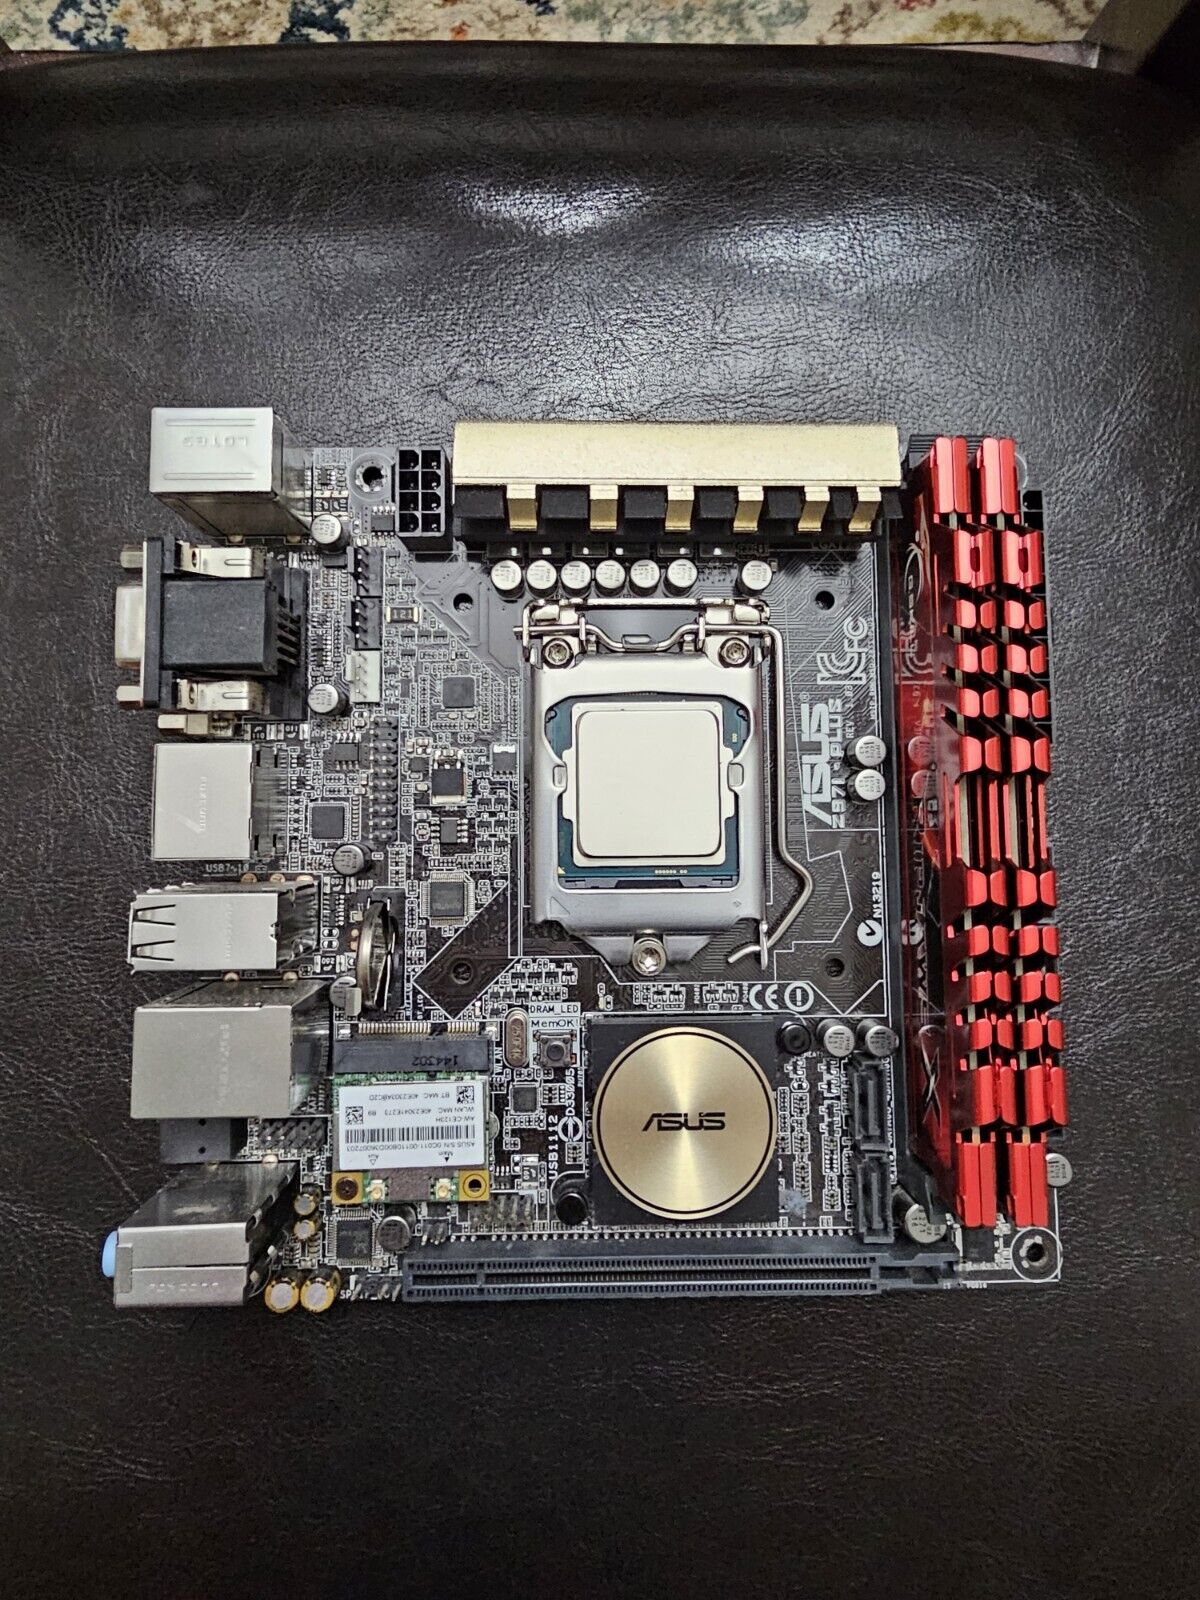 Intel core i5 4460 plus ASUS Z97I-PLUS Mini Itx Gaming Motherboard with 8GB DDR3